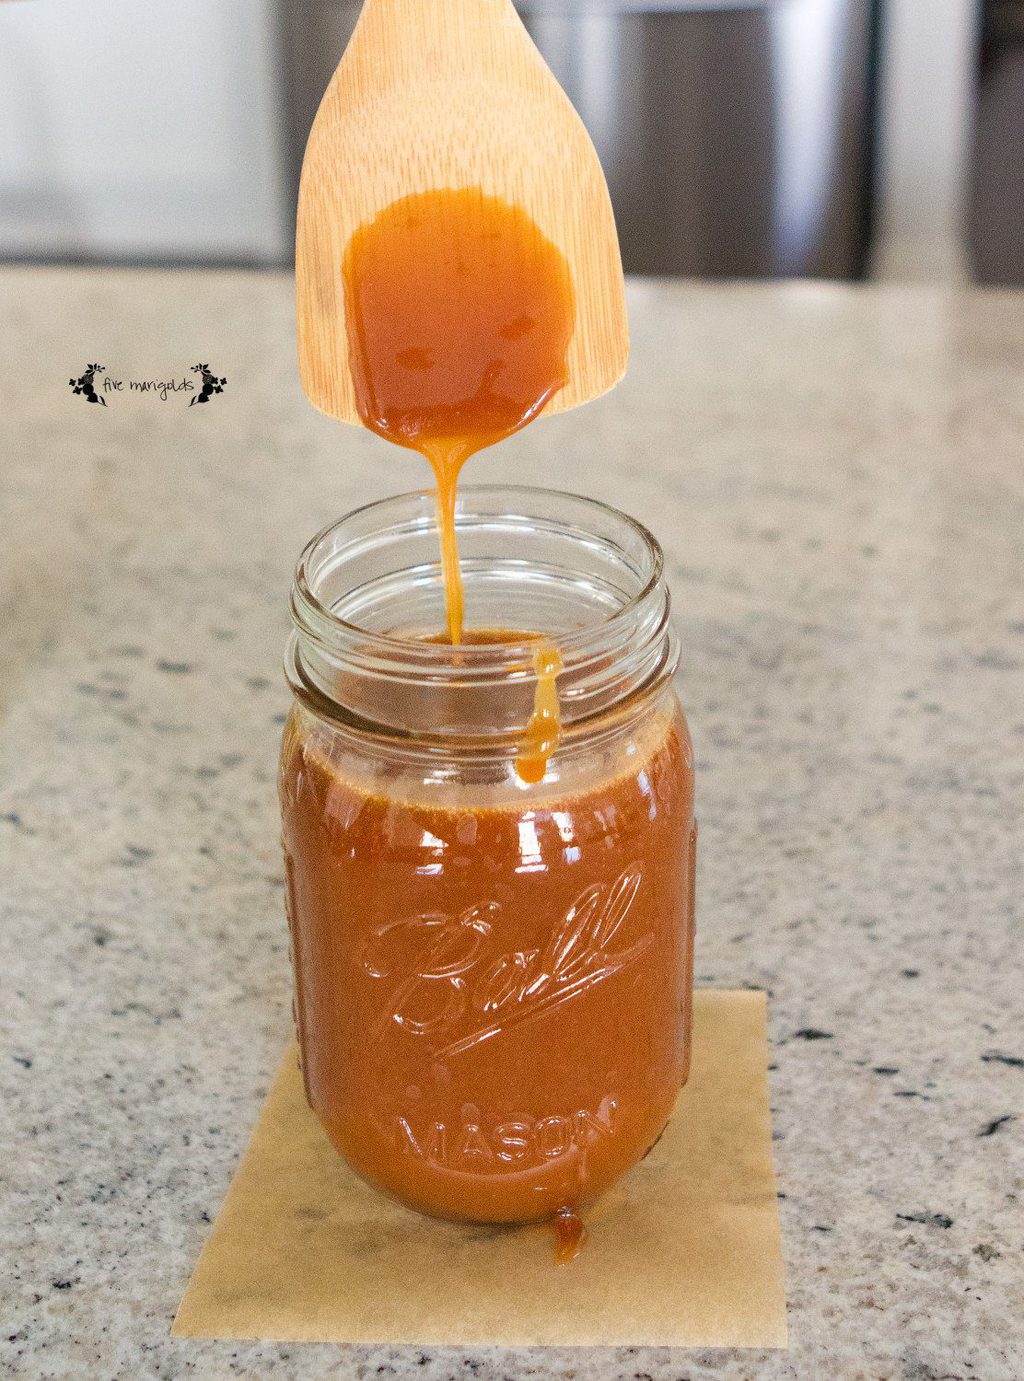 Create a Salted Caramel Apple Bar with this decadent Salted Caramel sauce and your favorite sweet and savory toppings. | Five Marigolds